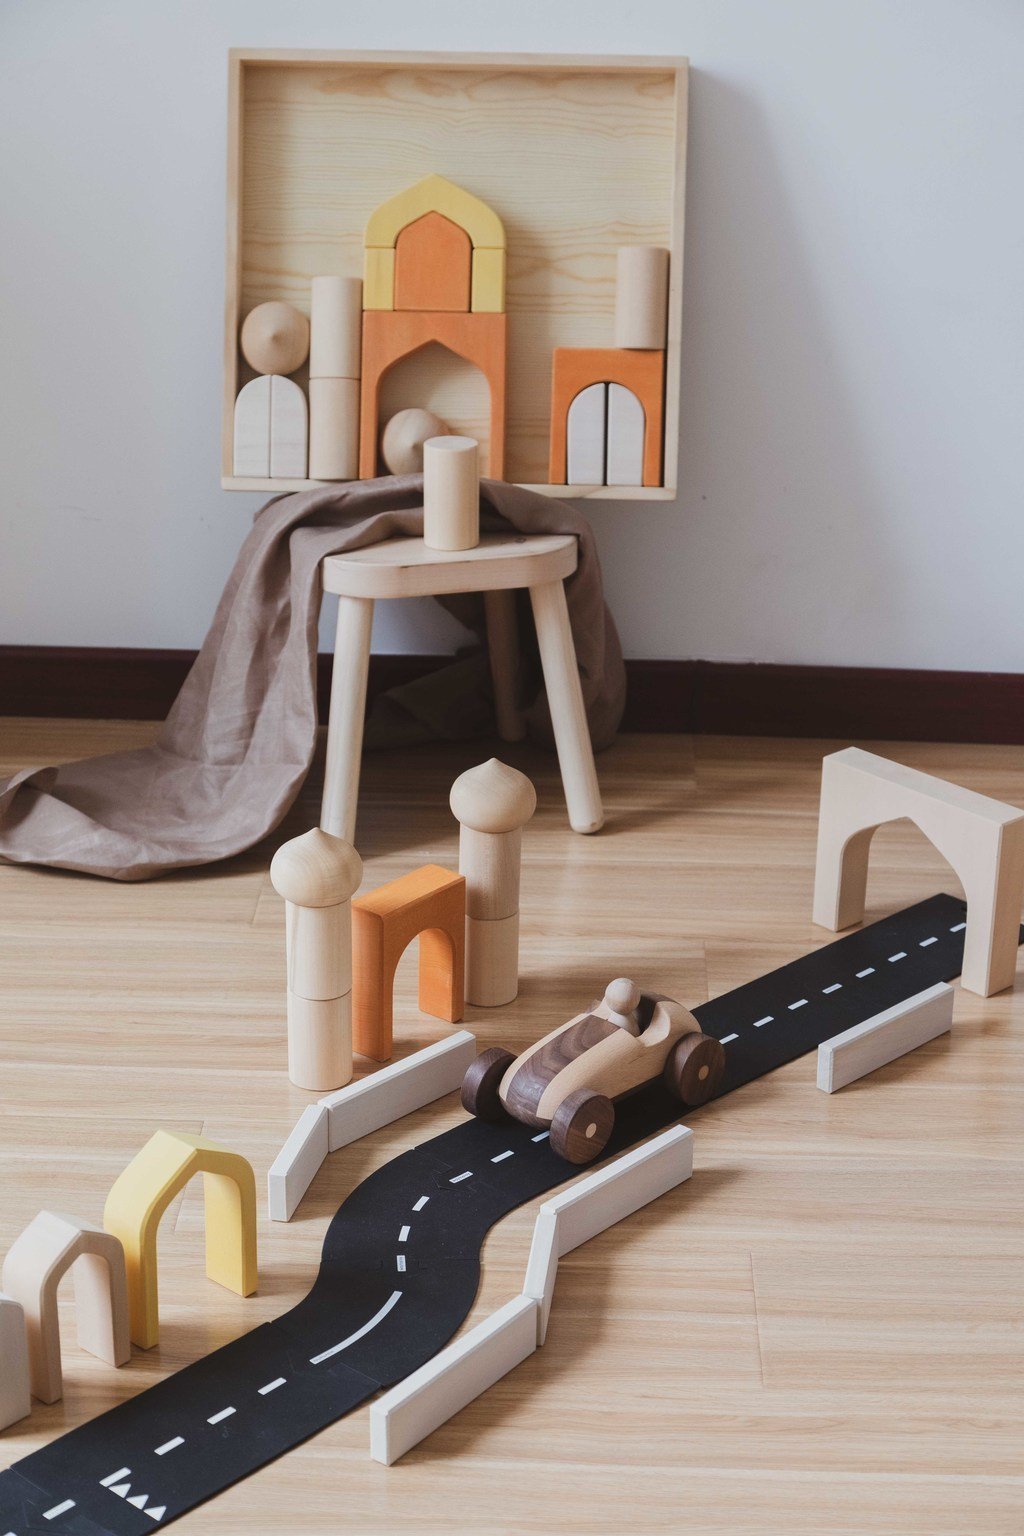 Castle Block Set by Avdar - Wood Wood Toys Canada's Favourite Montessori Toy Store